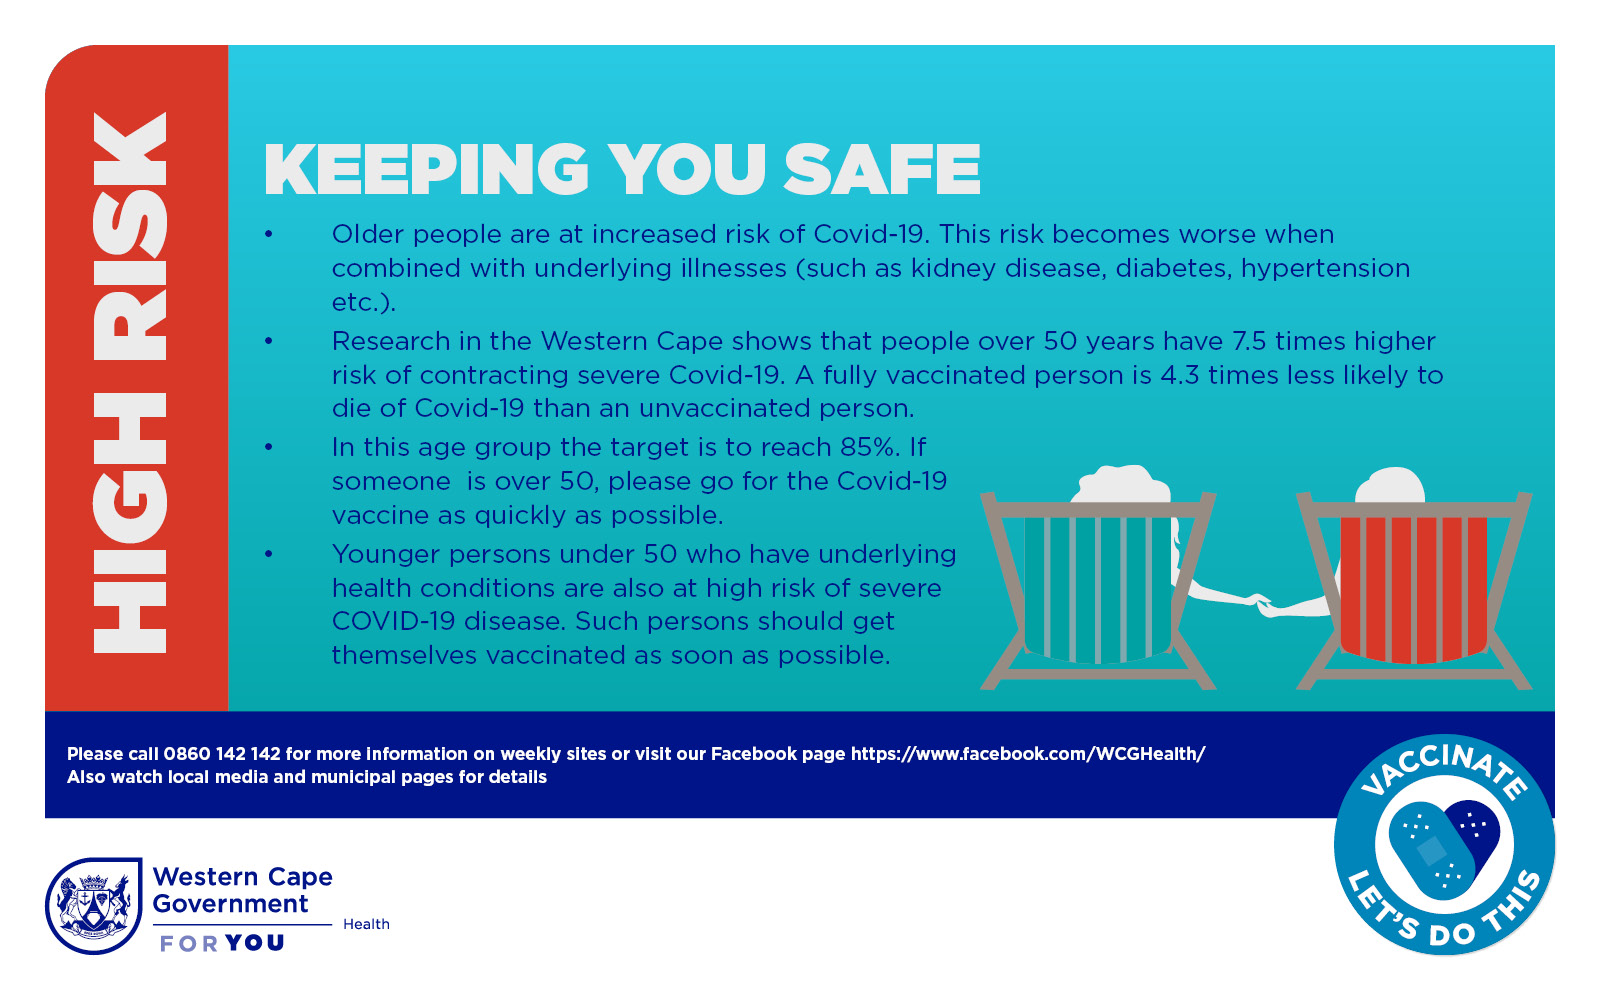 Save your summer: Keeping you safe - Over 50s are at high risk of Covid-19